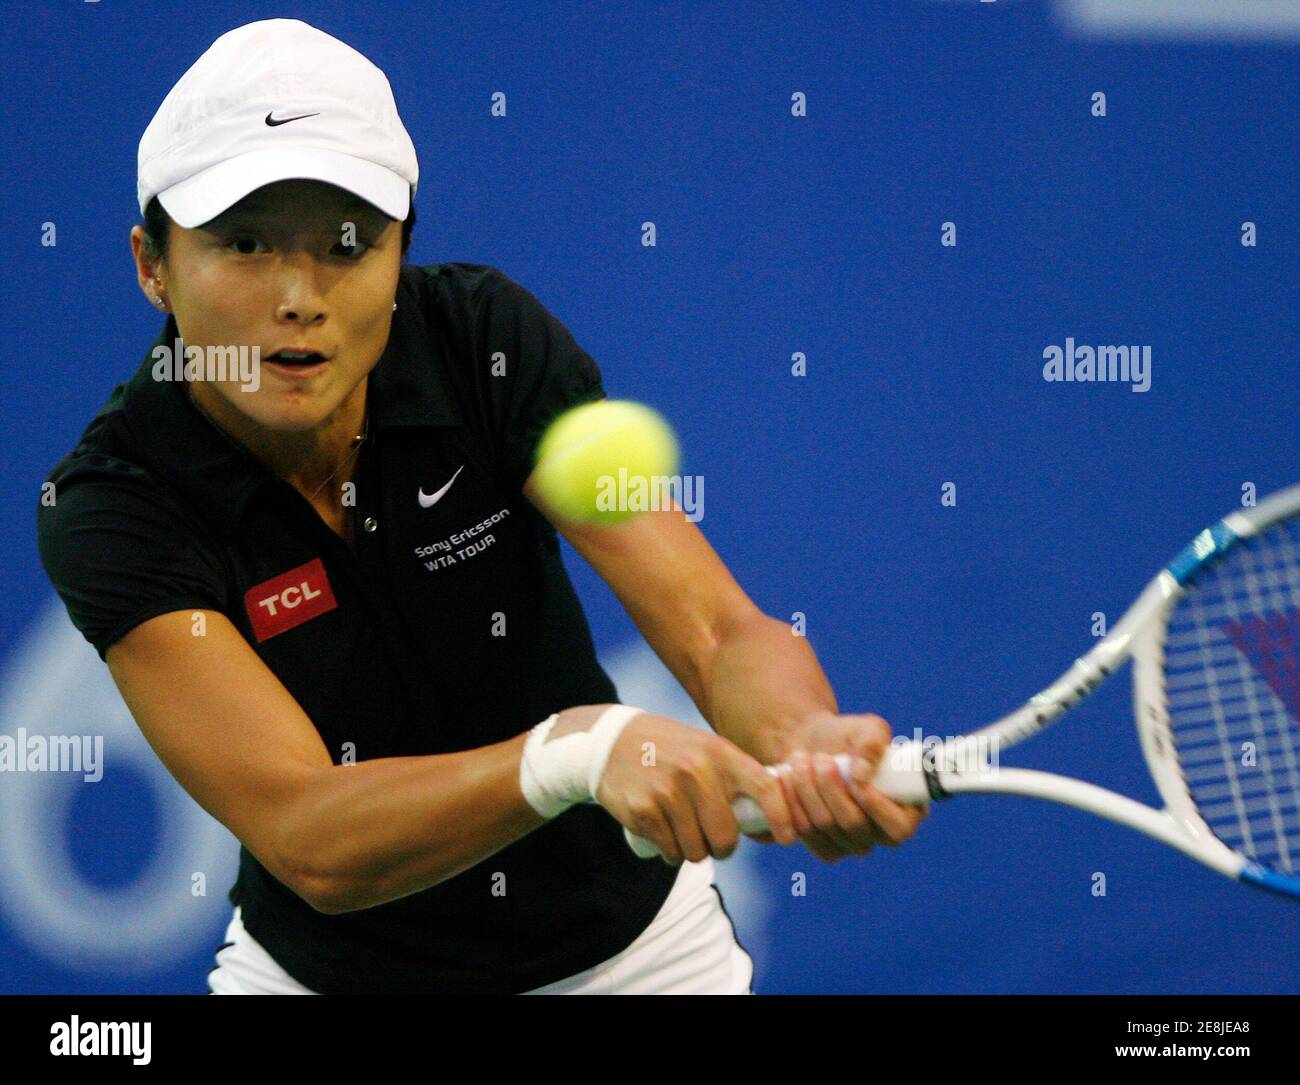 Zi Yan of China returns a shot to Jelena Jankovic of Serbia during their first round tennis match at the Bangkok Open October 10, 2007. REUTERS/Chaiwat Subprasom (THAILAND) Stock Photo